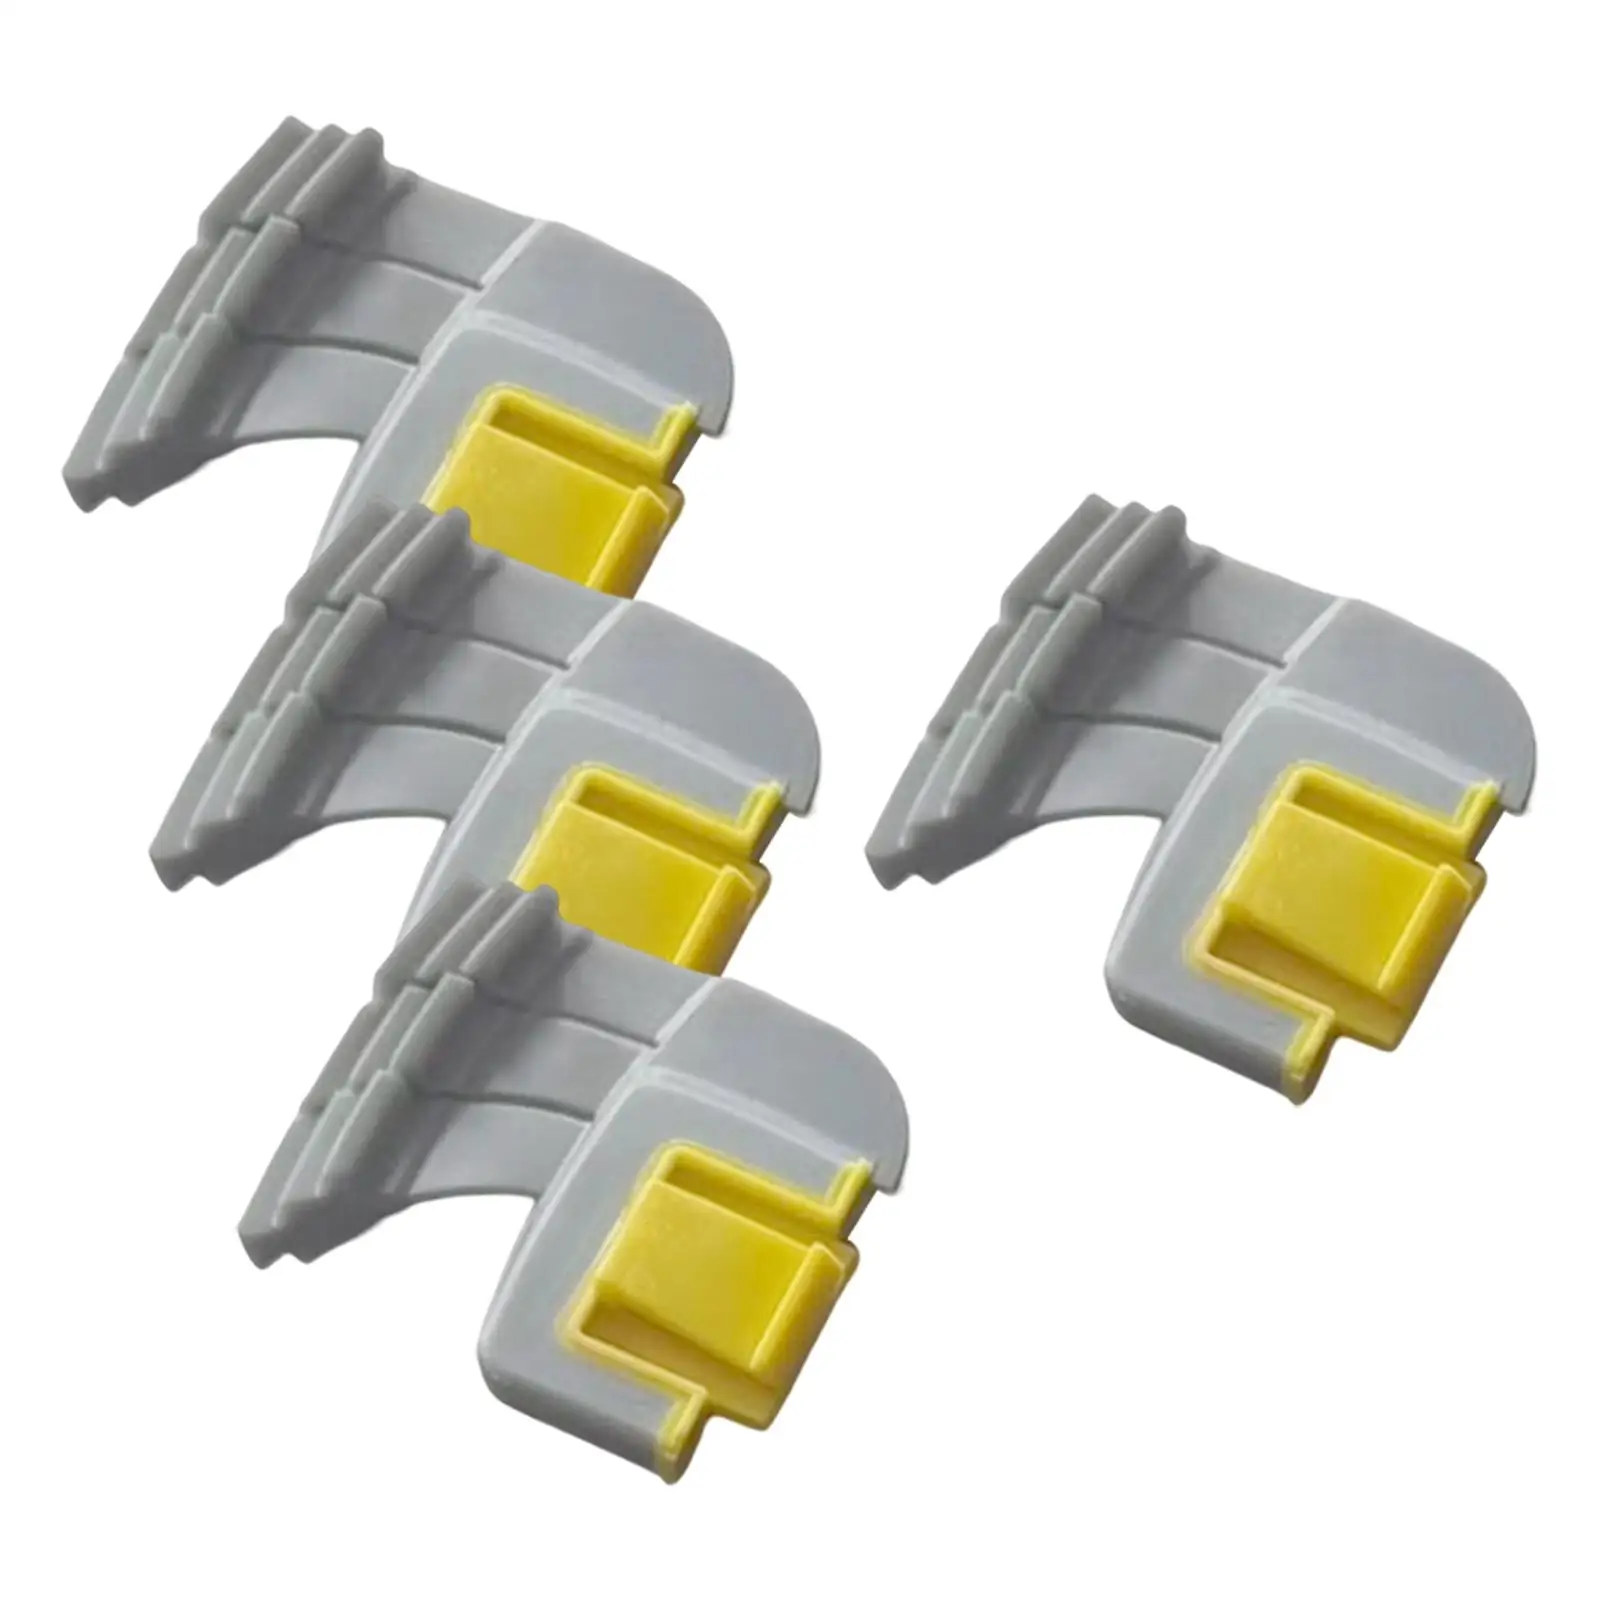 4Pcs Cyclonic Scrubbing Brush for R0714400 Suction Robotic Pool Cleaner Accessories